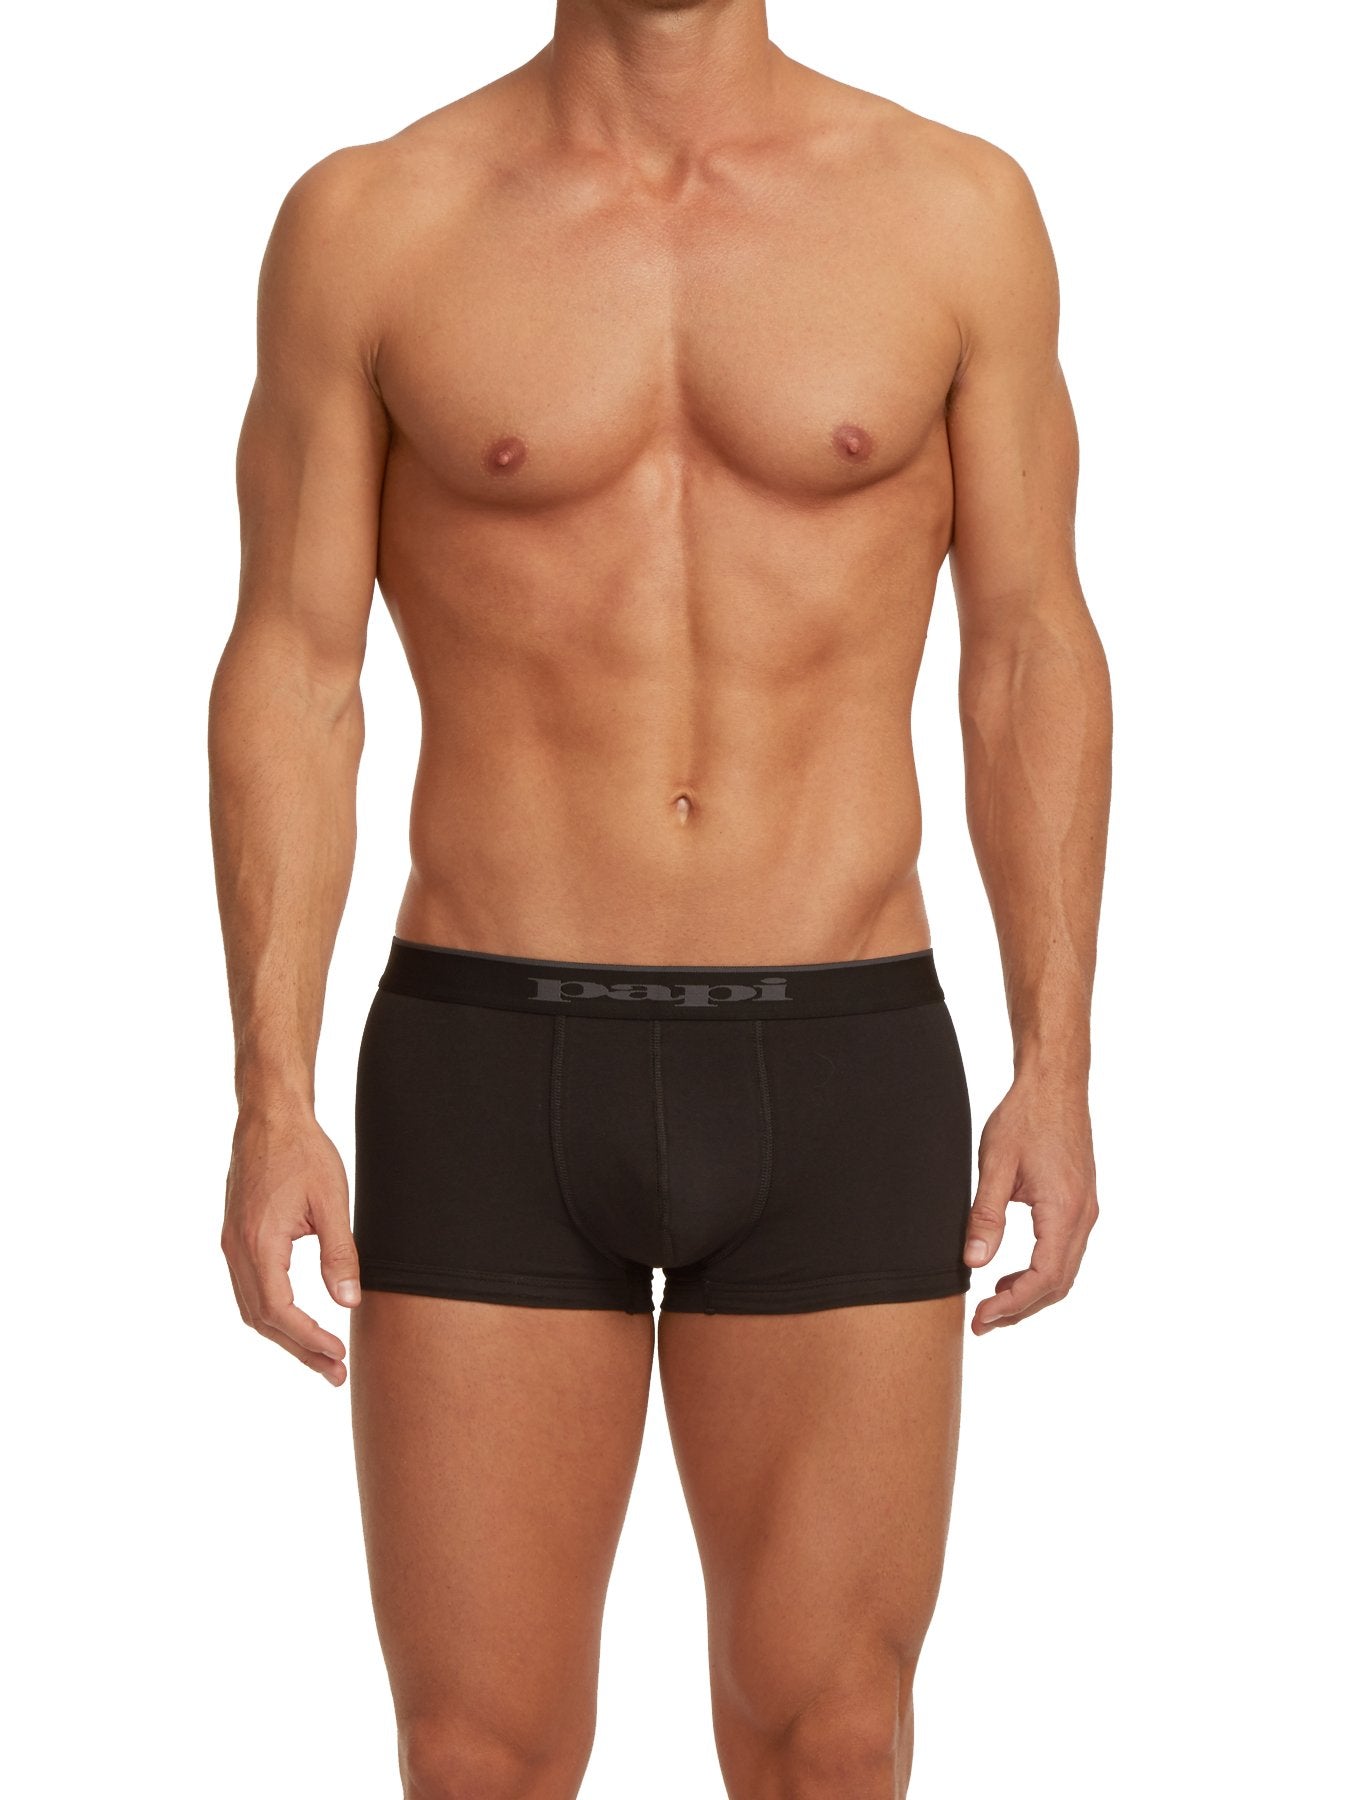 Items on sale excluded – Page 2 – Papi Underwear